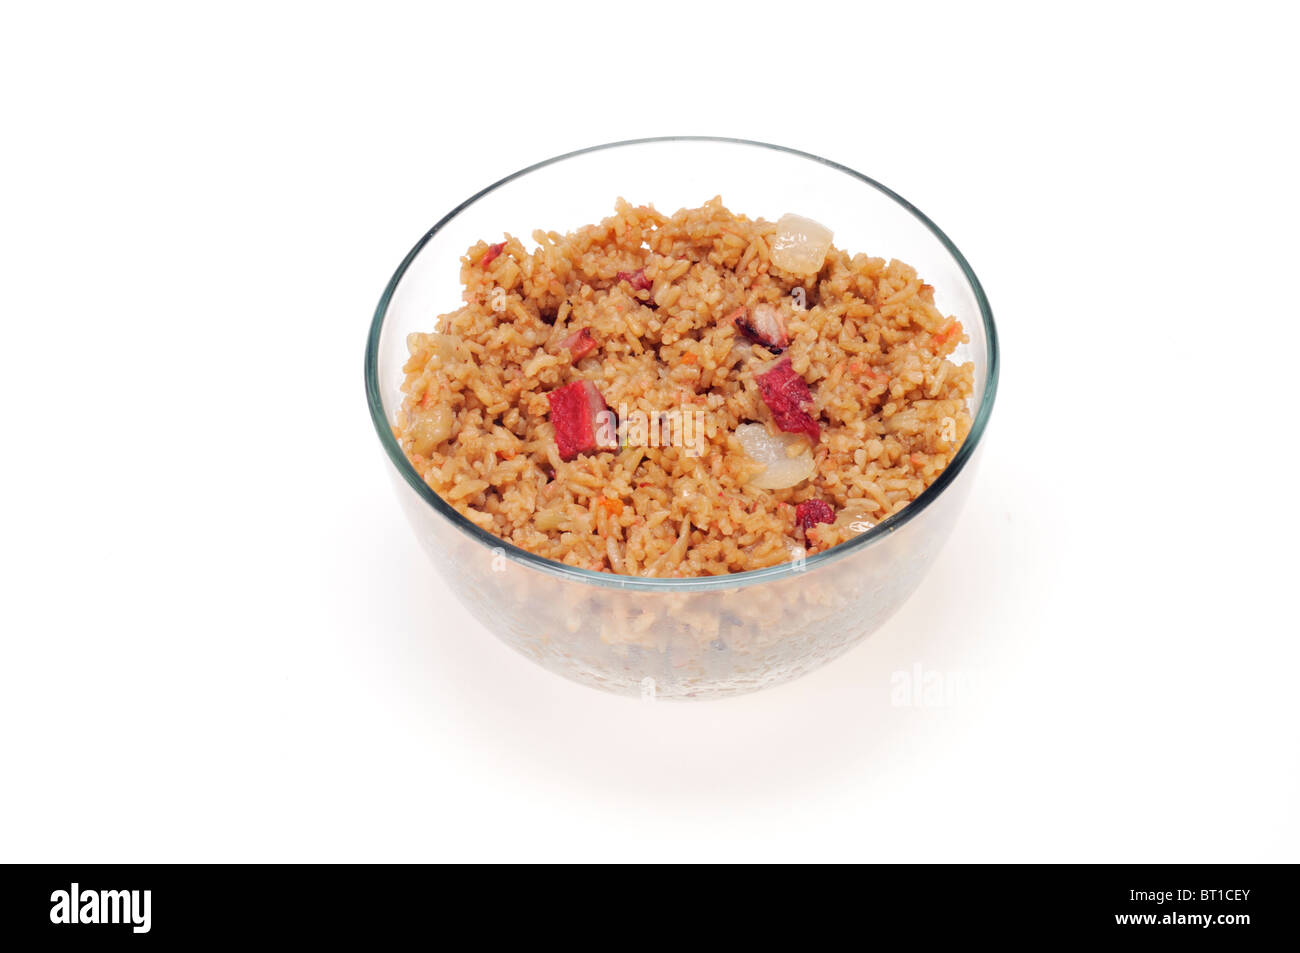 Glass bowl of cooked Chinese pork fried rice on white background cut out. Stock Photo